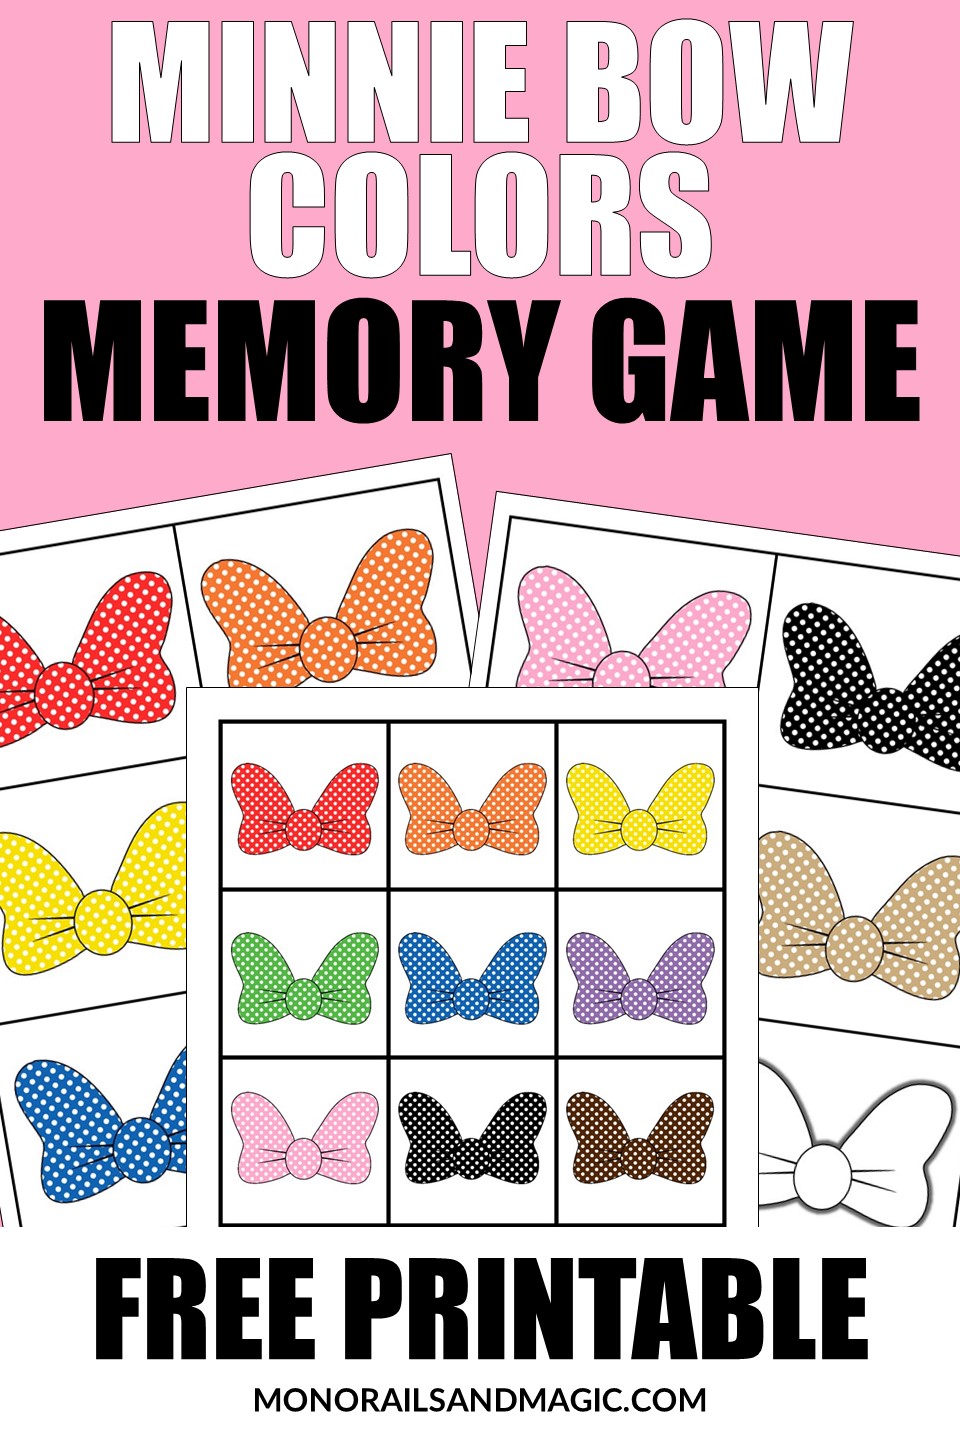 Free printable Minnie Mouse bow colors memory game for kids.